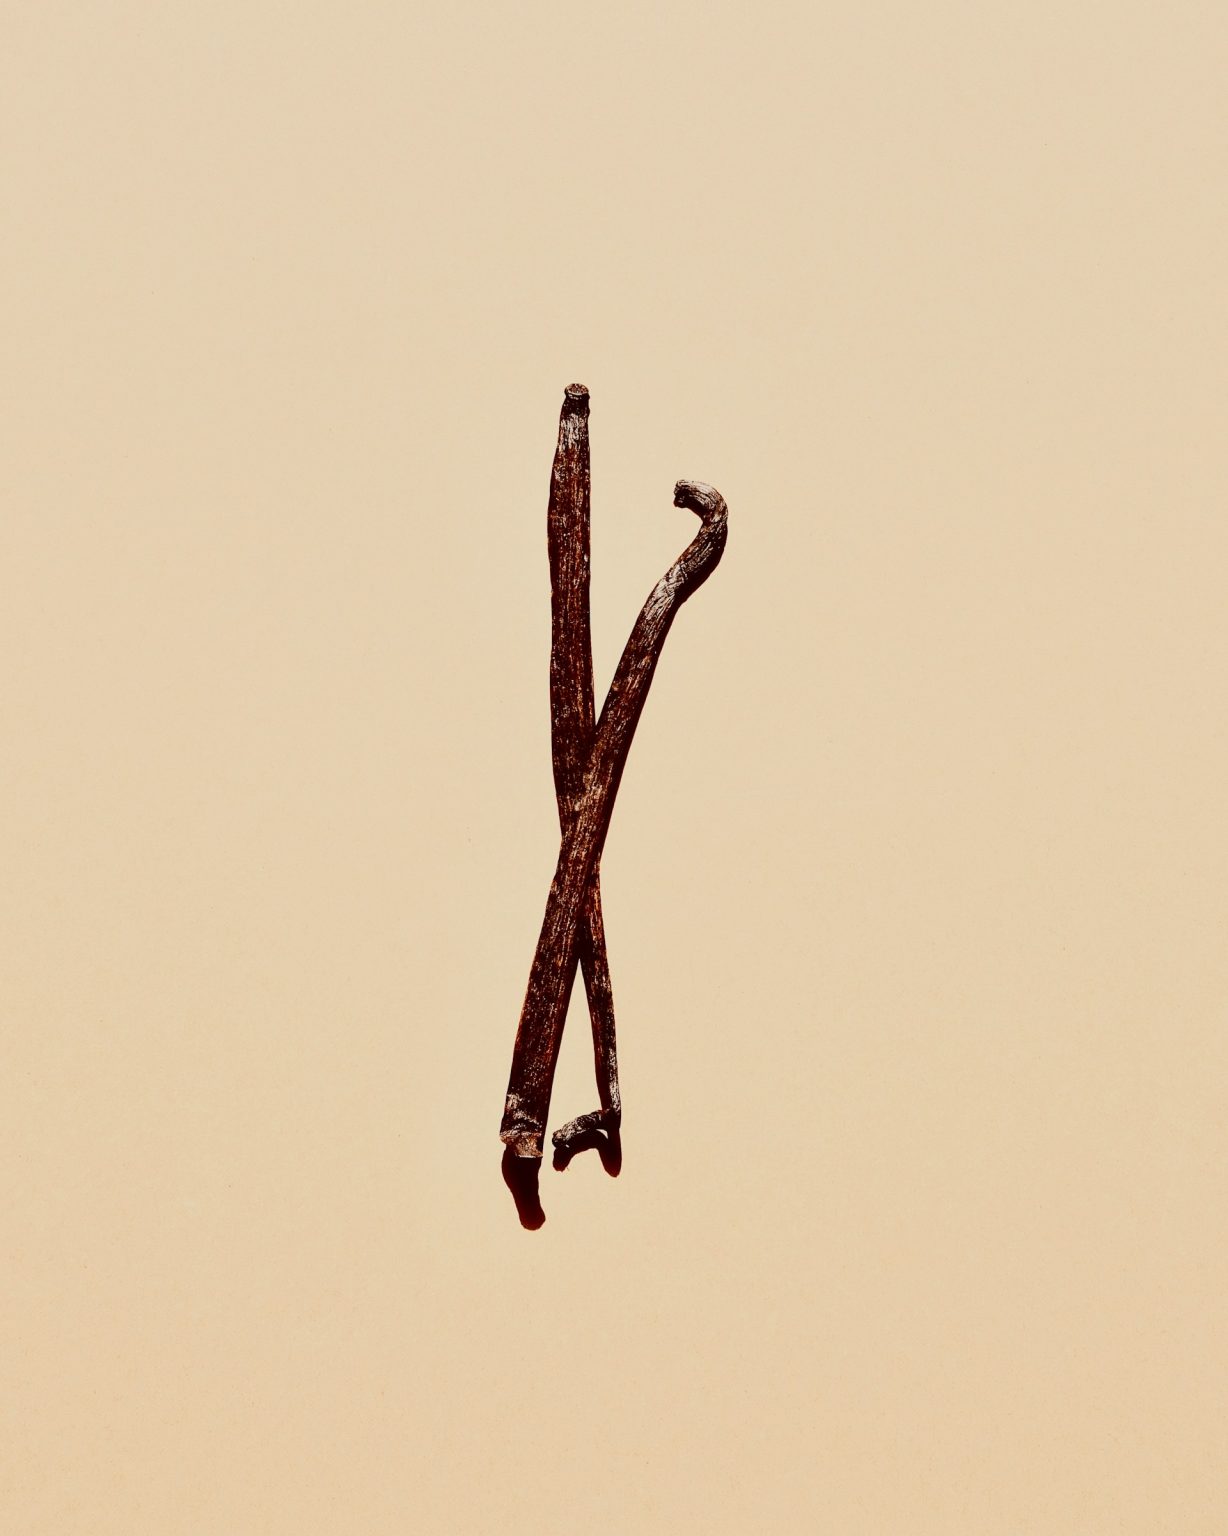 Two vanilla beans oriented vertically on a light brown background